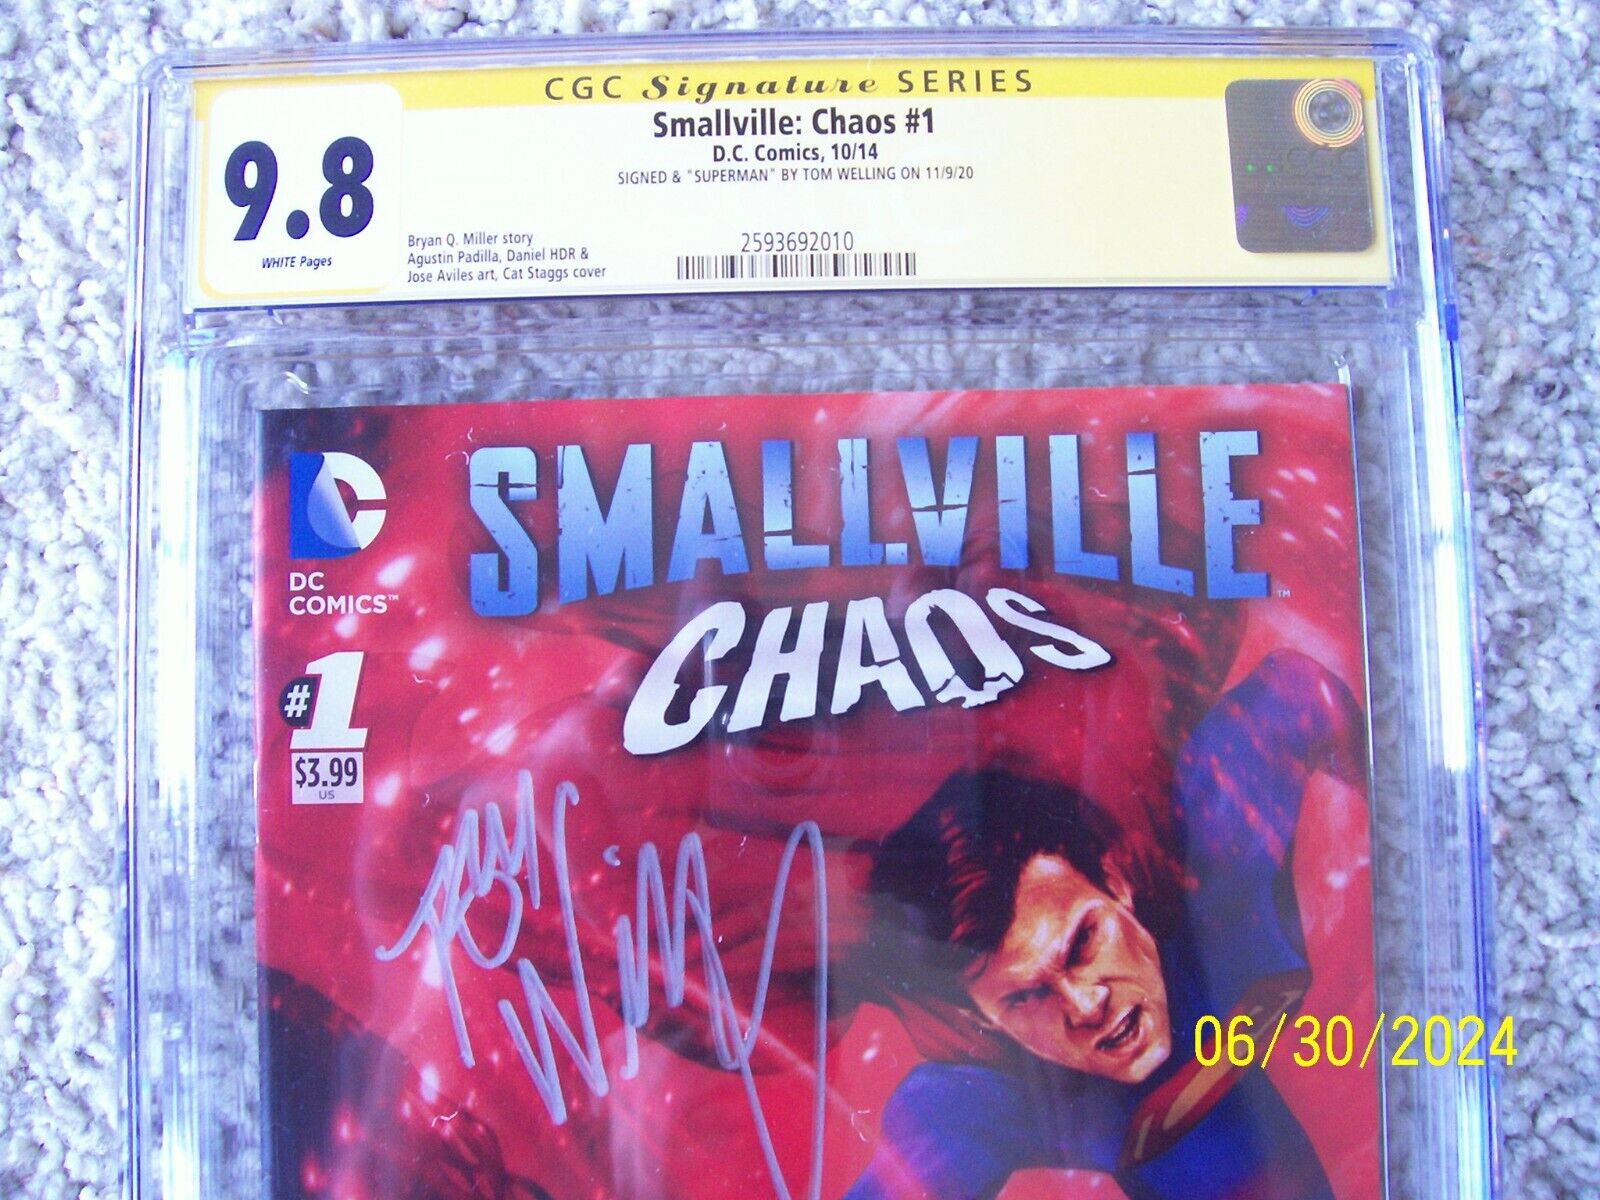 2014 D.C. Comics Smallville Chaos #1 CGC SS 9.8 Signed Superman Tom Welling